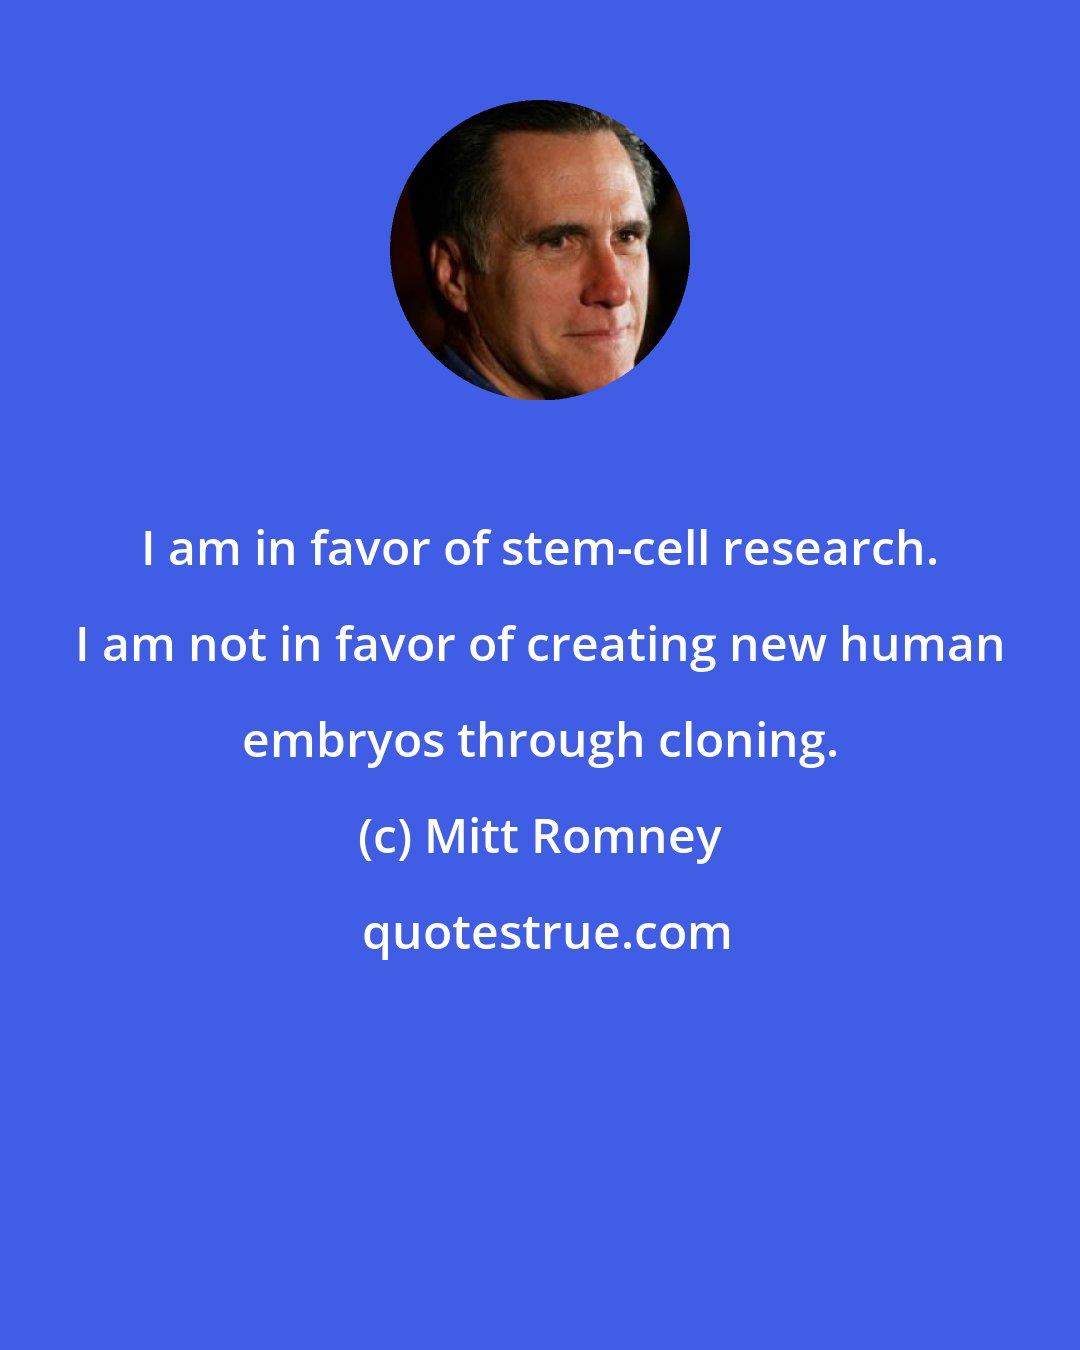 Mitt Romney: I am in favor of stem-cell research. I am not in favor of creating new human embryos through cloning.